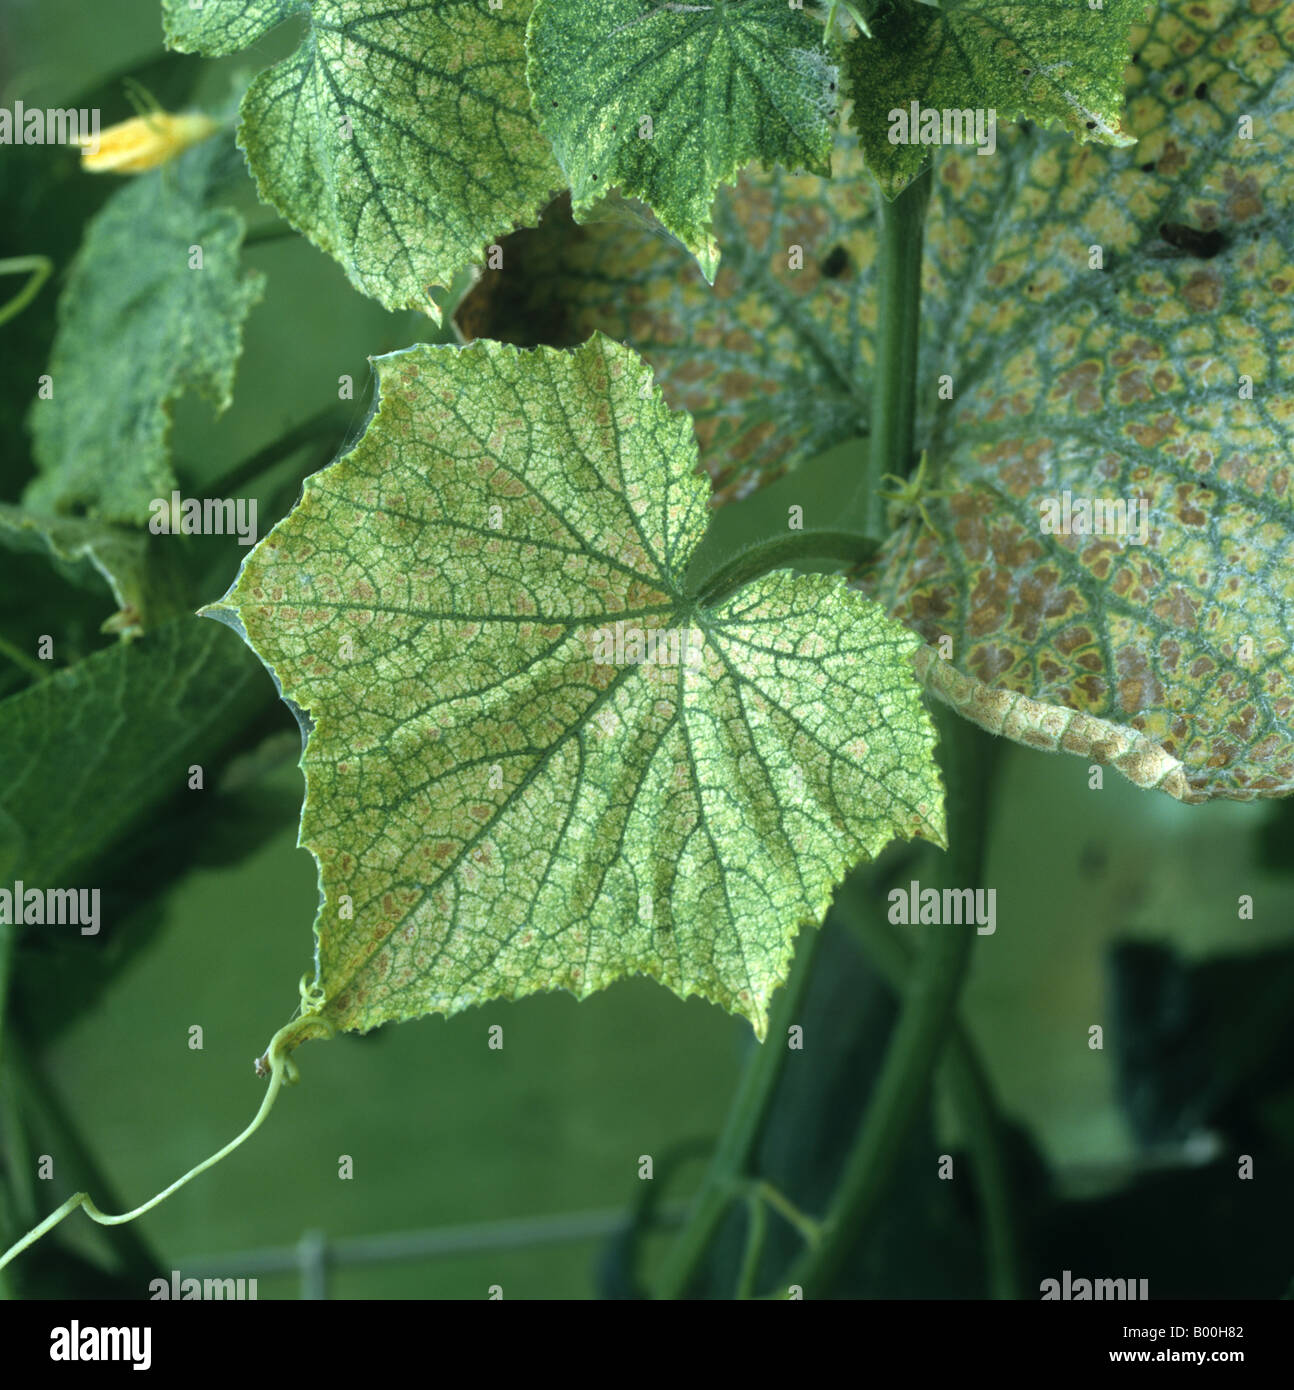 Two spotted spider mite Tetranychus urticae feeding damage to greenhouse cucumber leaf Stock Photo